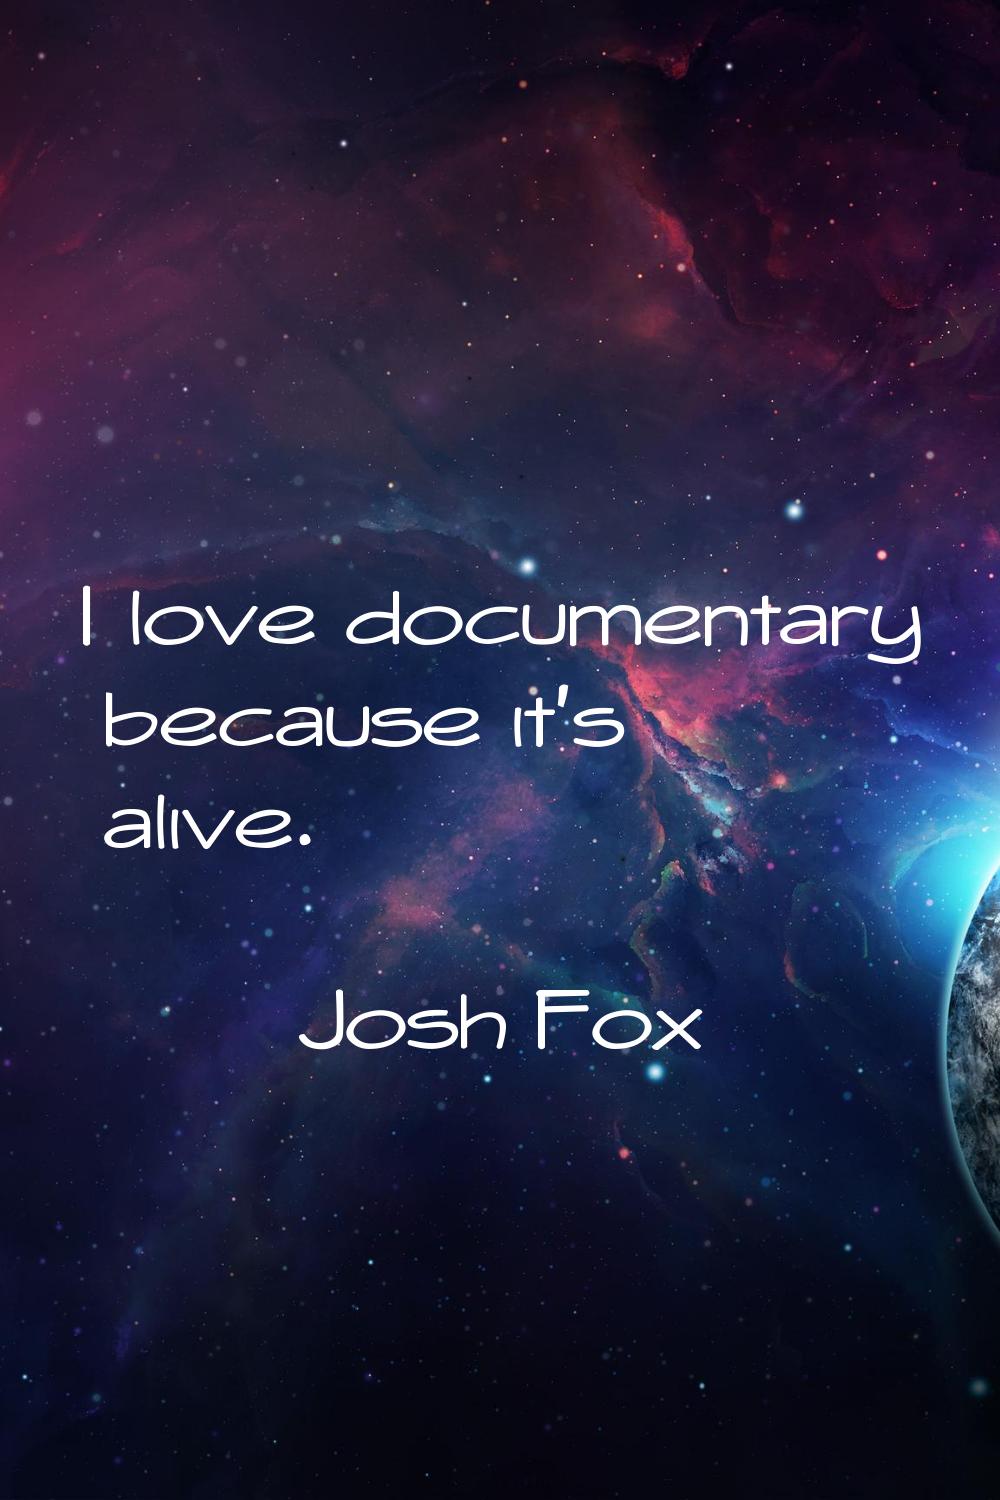 I love documentary because it's alive.